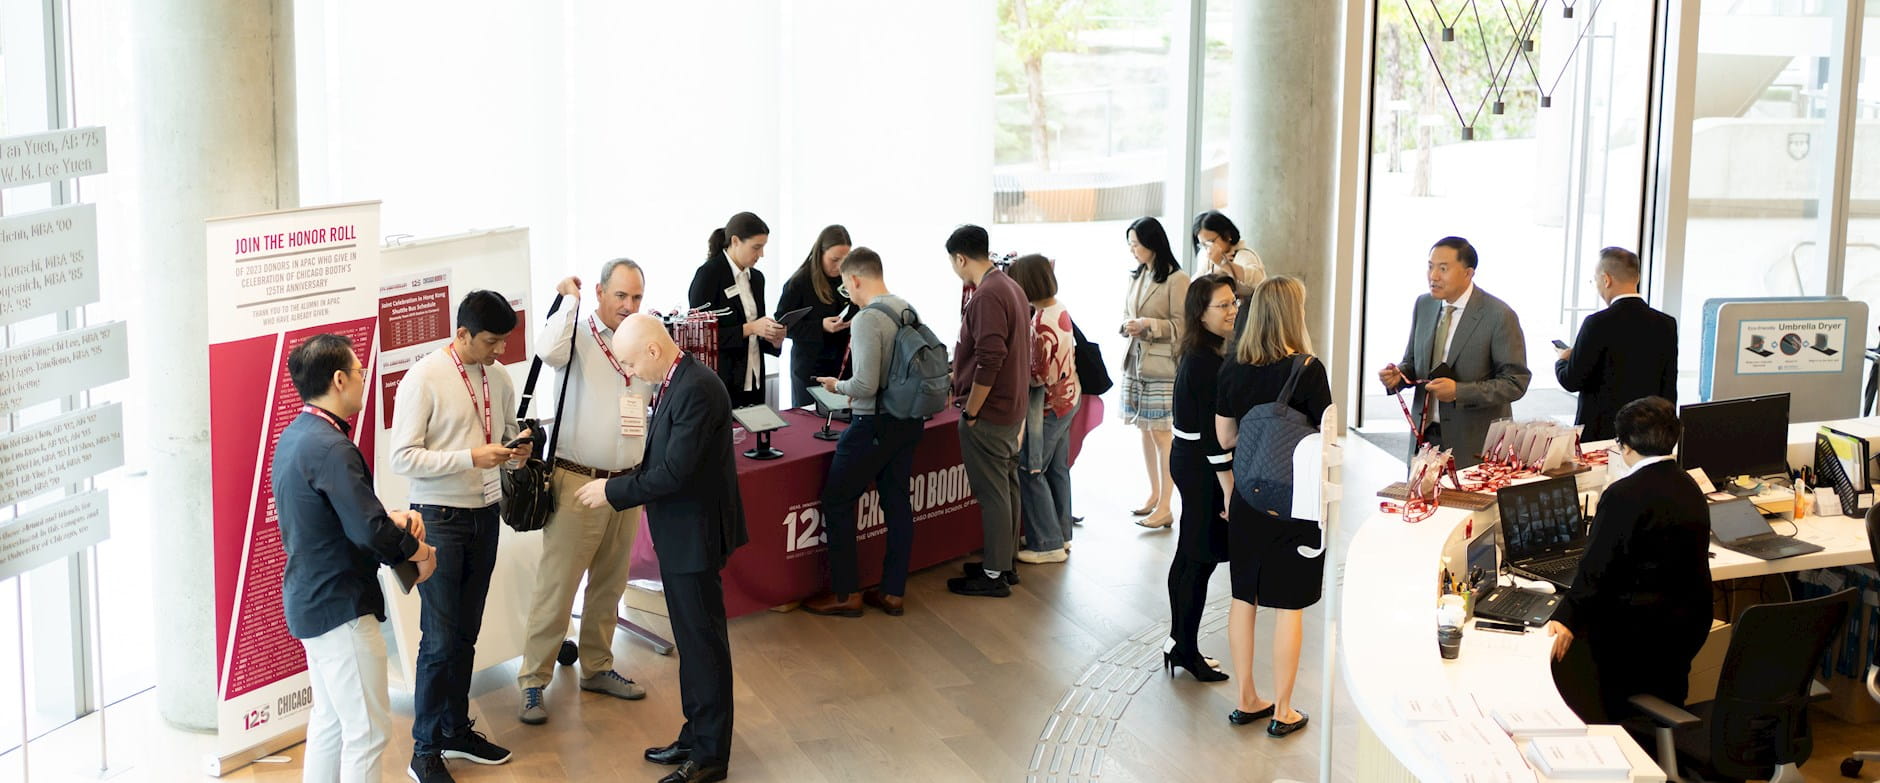 Chicago Booth students engaging with the UChicago Booth at an event